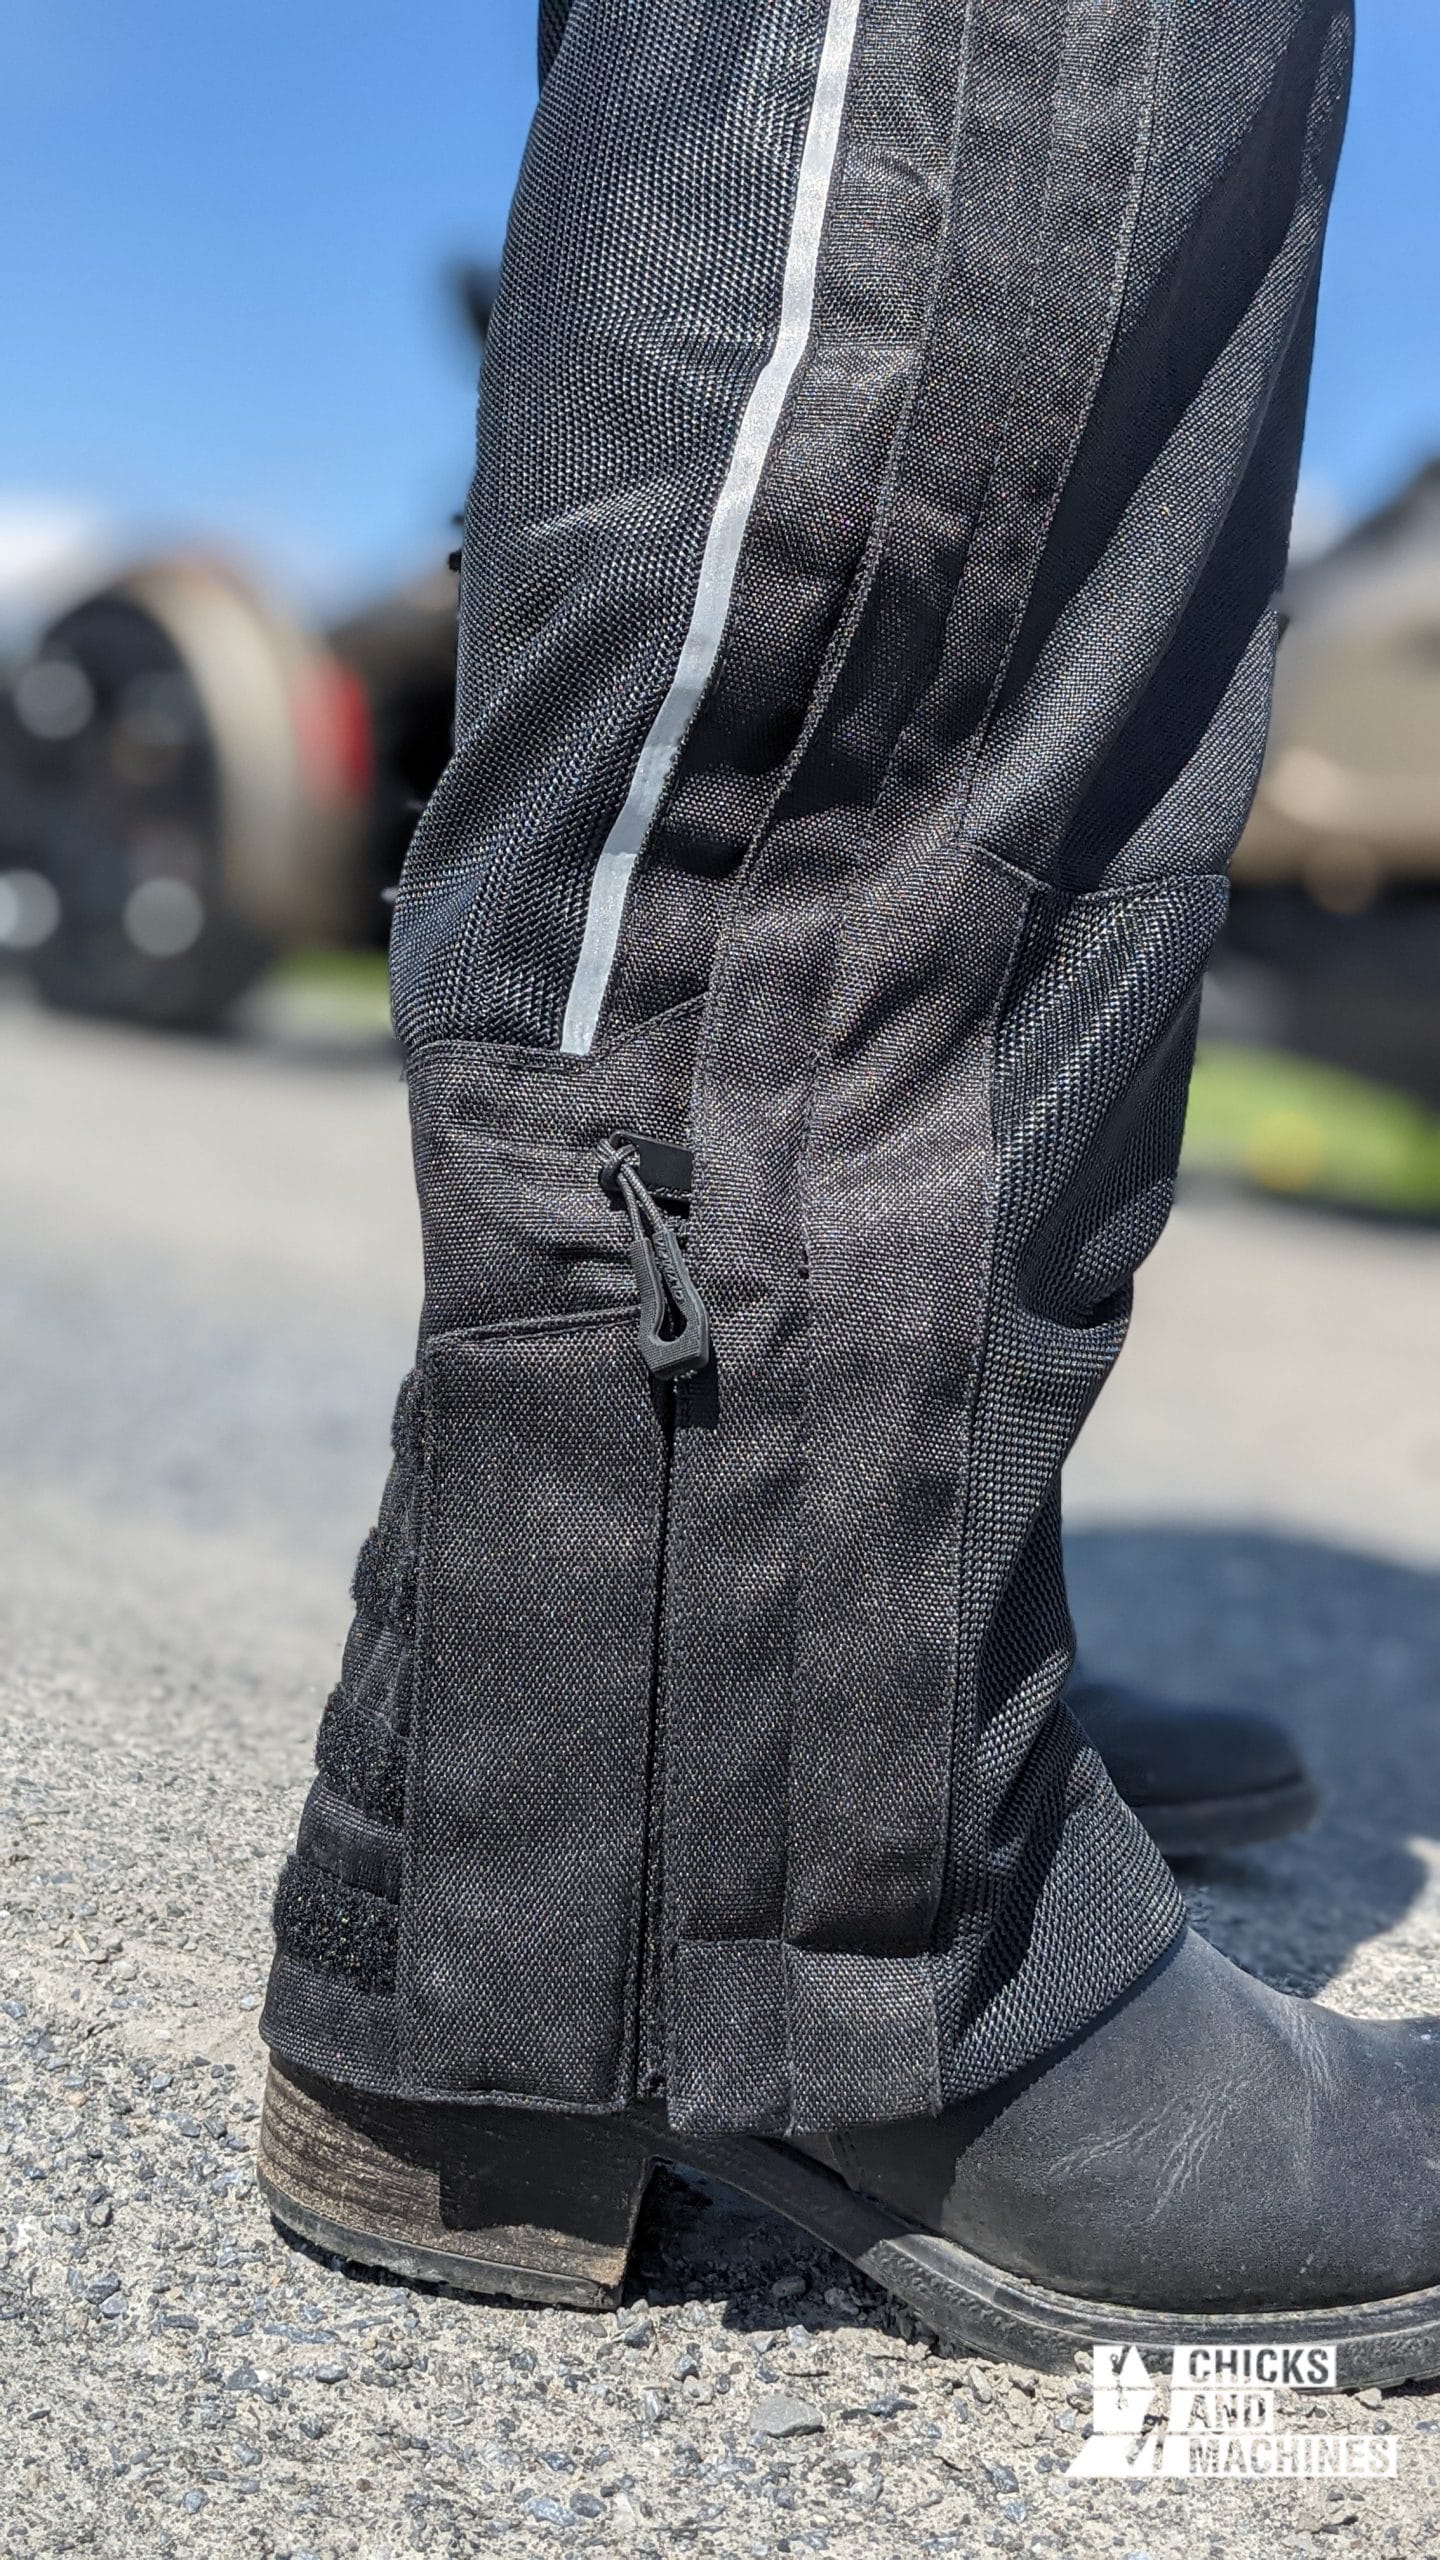 Olympia's Airglide 6 Pants practical zippers